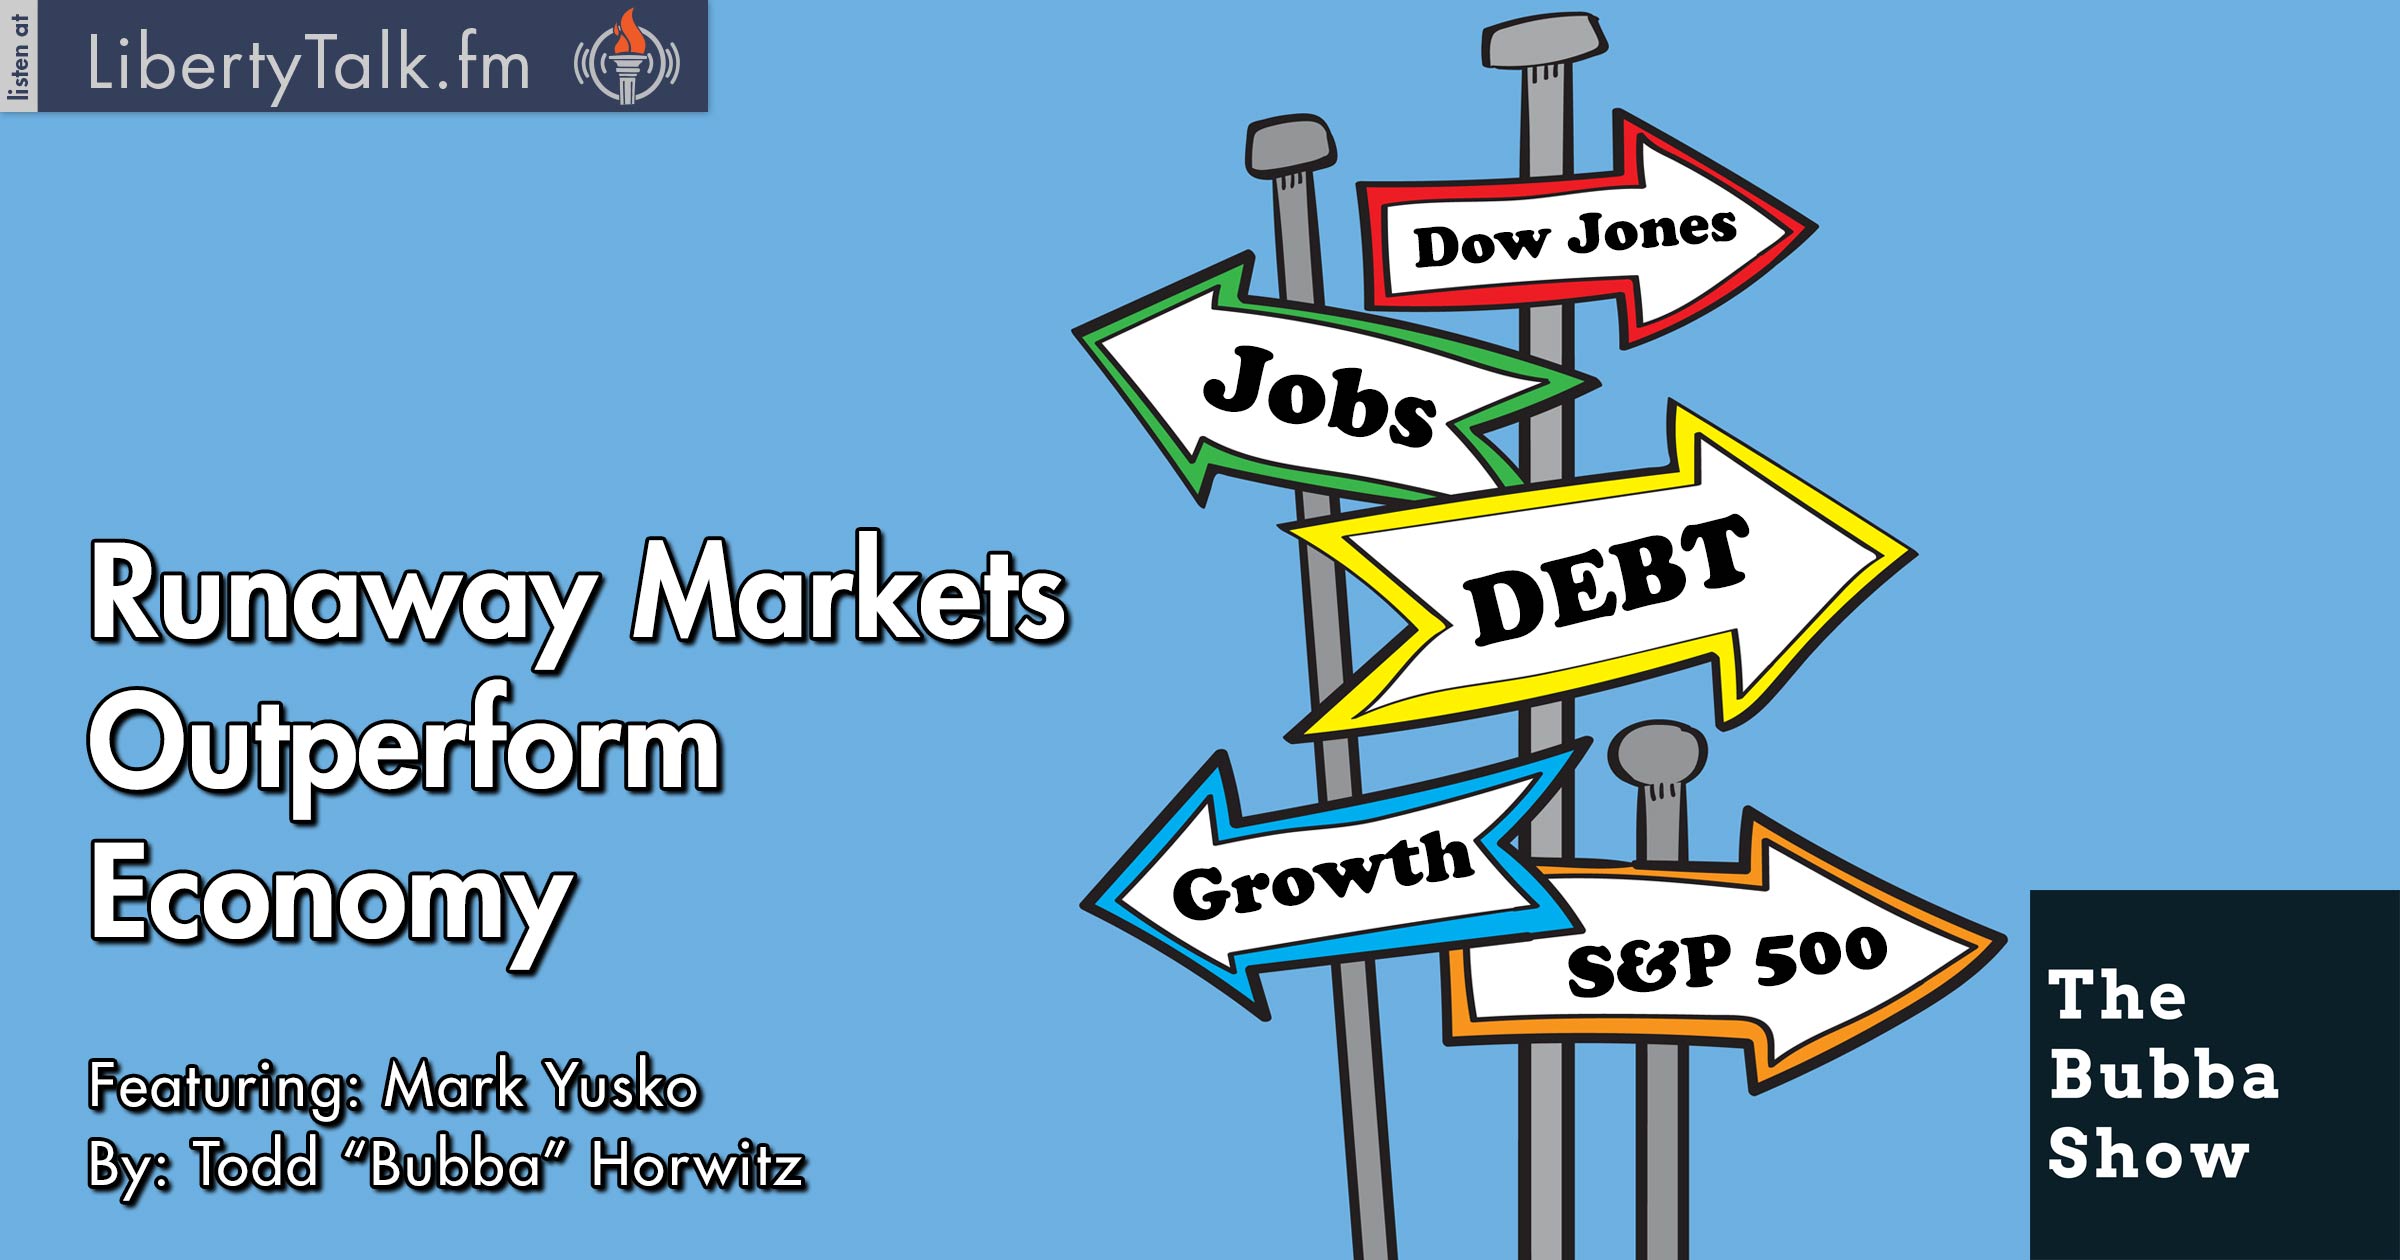 Runaway Markets Outperform Economy - The Bubba Show